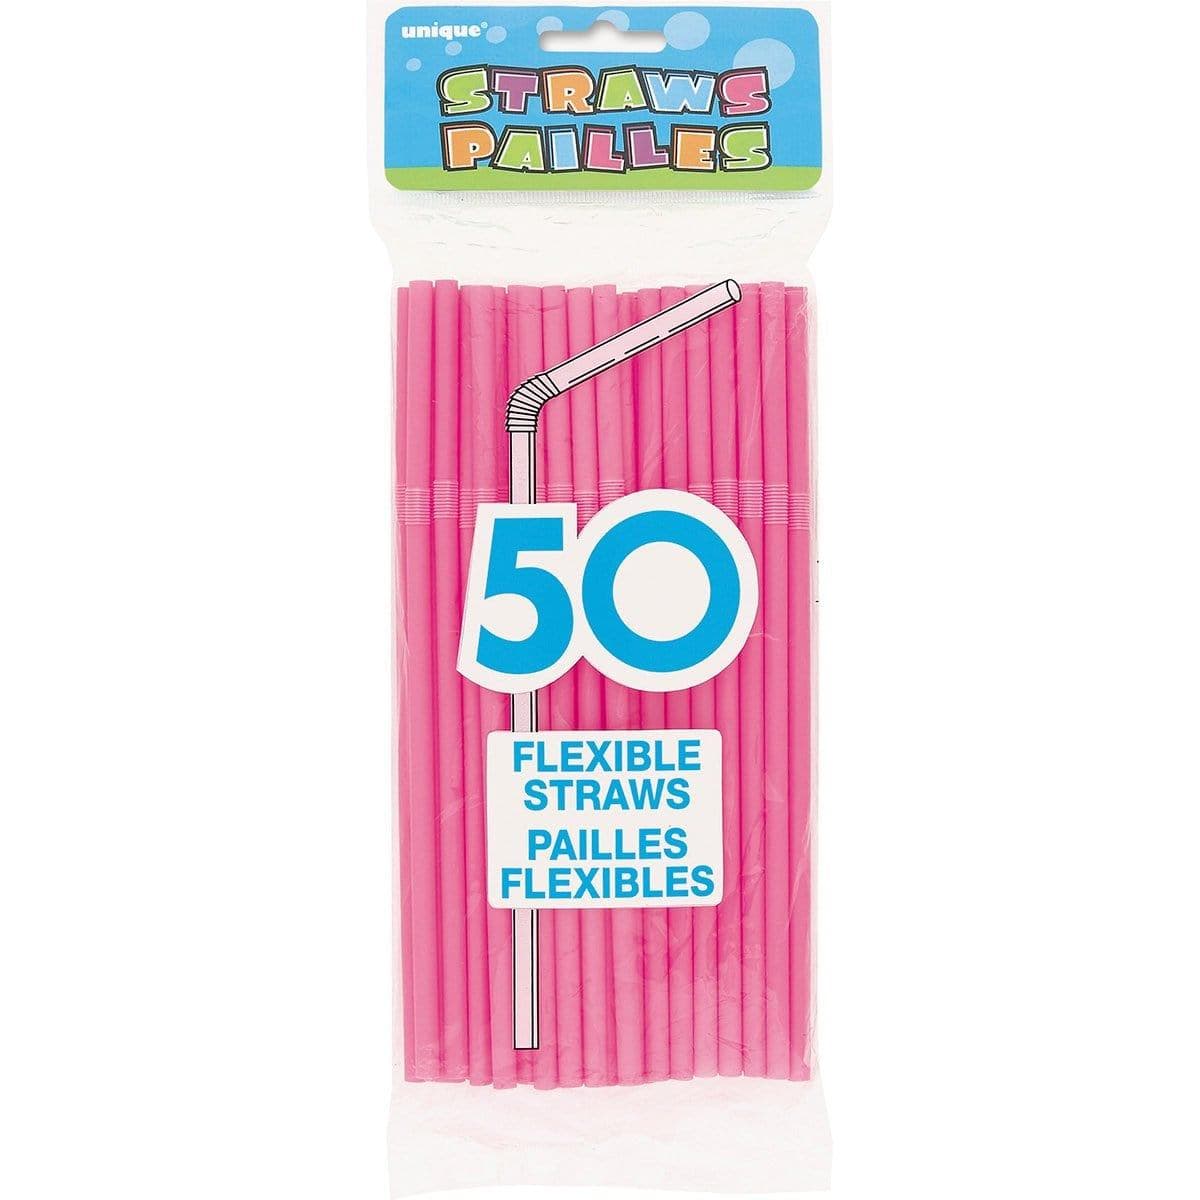 Buy Plasticware Flex-straws - Hot Pink 50/pkg. sold at Party Expert